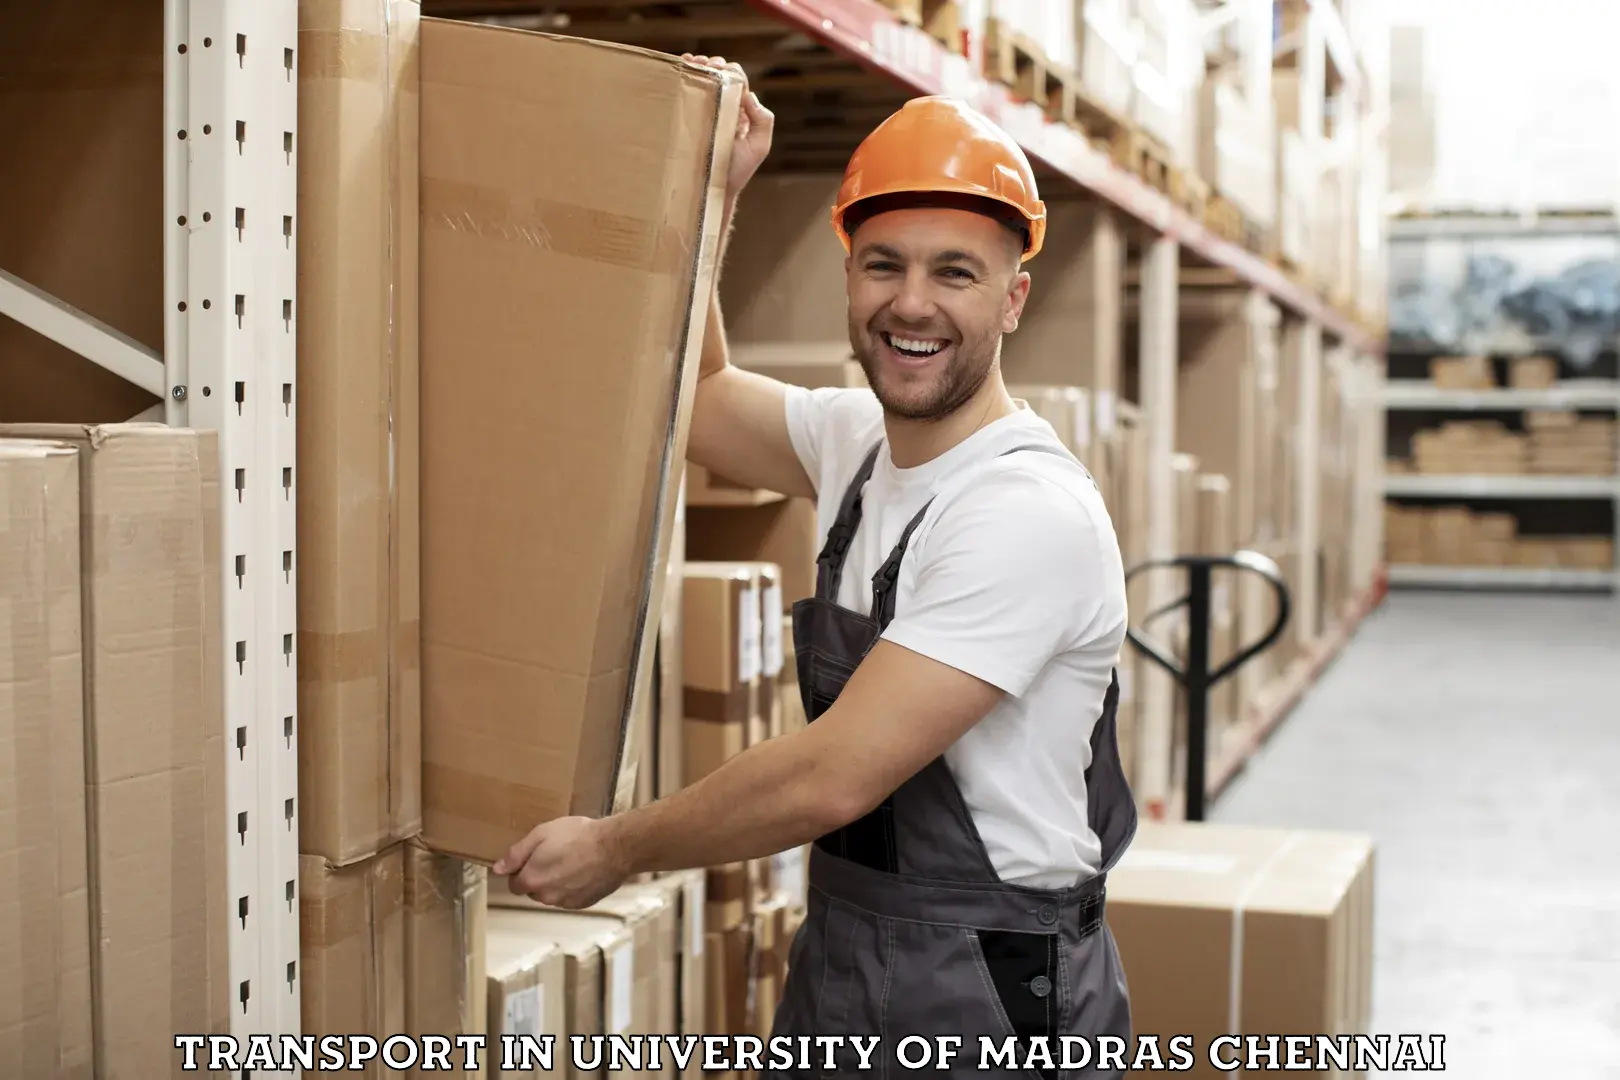 Container transport service in University of Madras Chennai